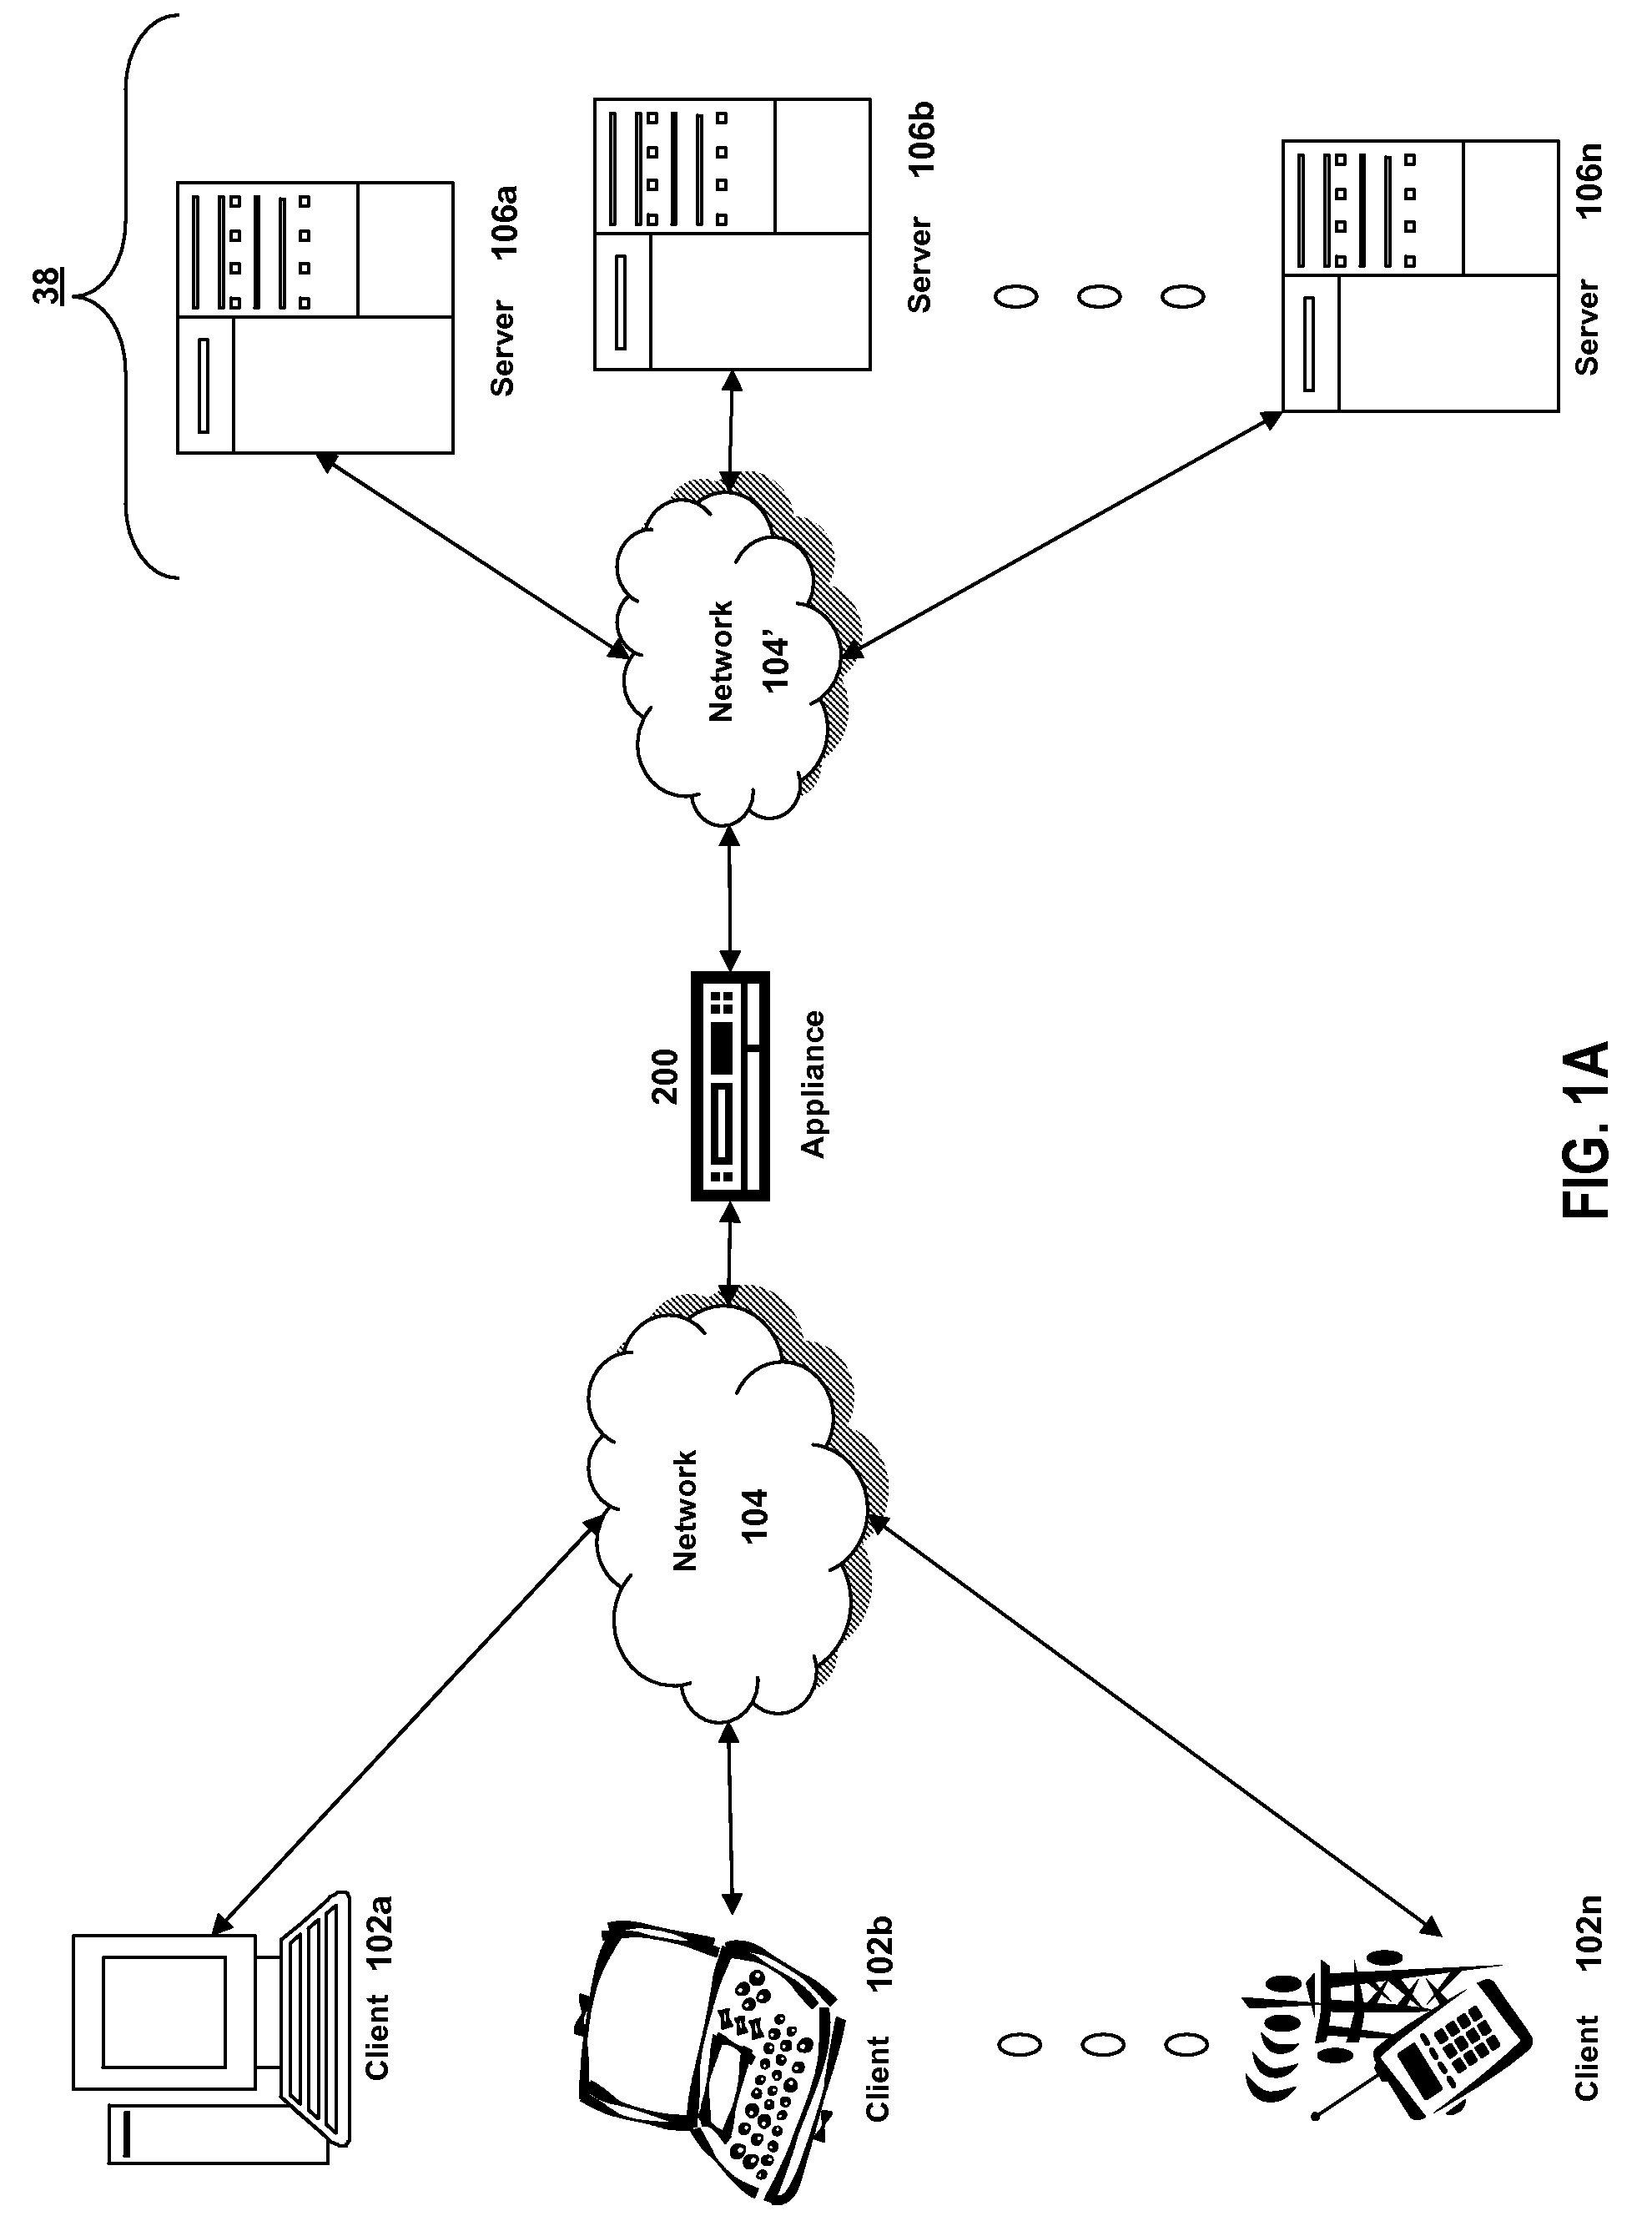 Systems and methods for load balancing via a plurality of virtual servers upon failover using metrics from a backup virtual server